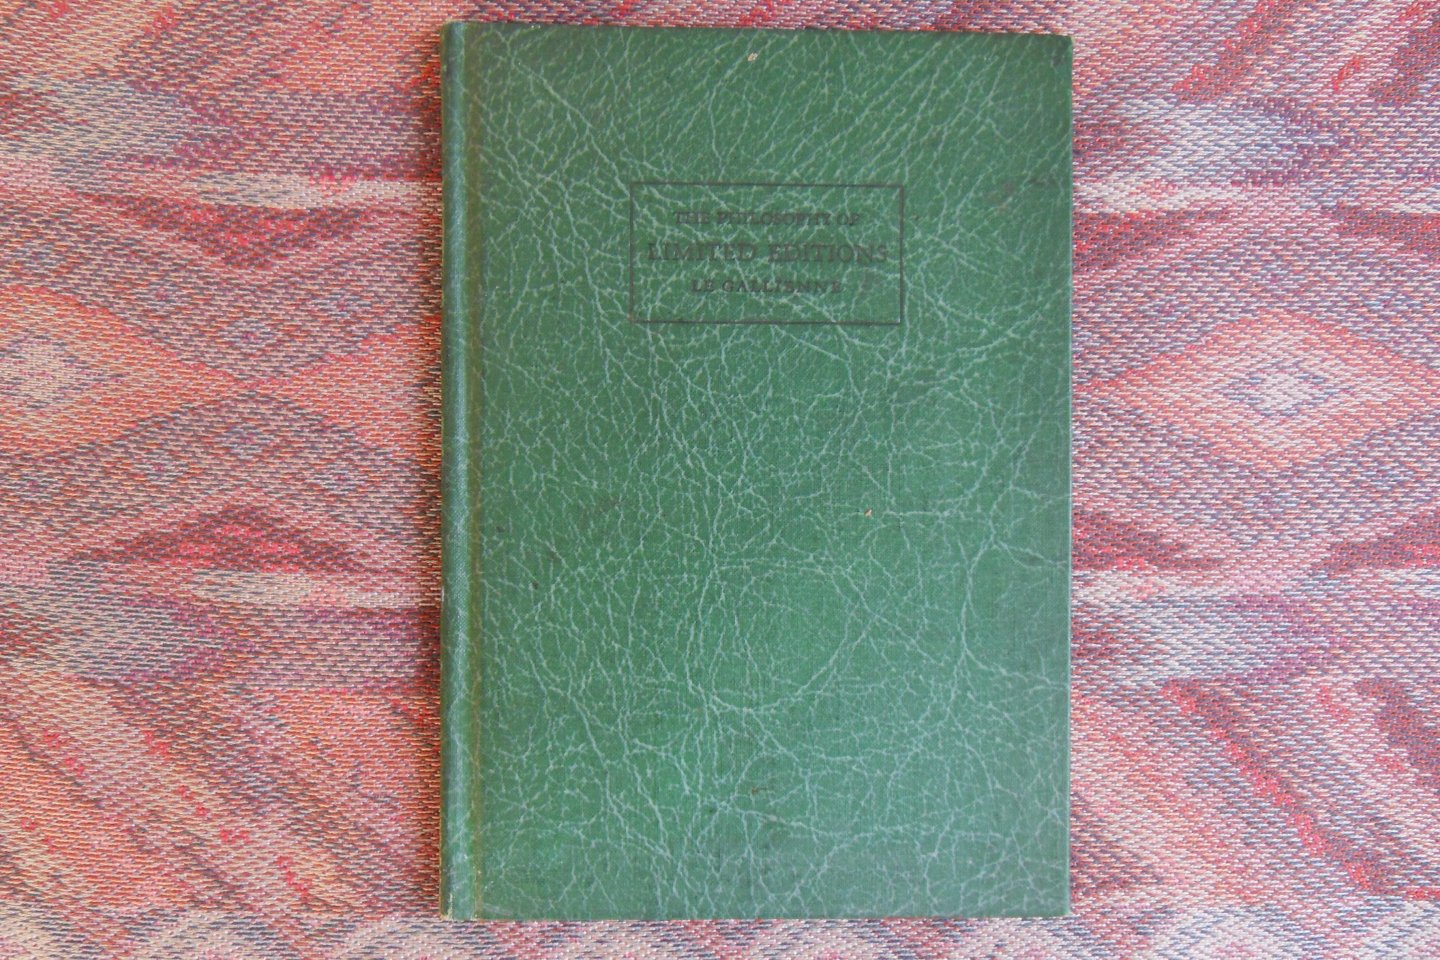 Gallienne, Richard le. - The Philosophy of Limited Editions. Taken from Prose Fancies. [ Only 500 copies printed ].